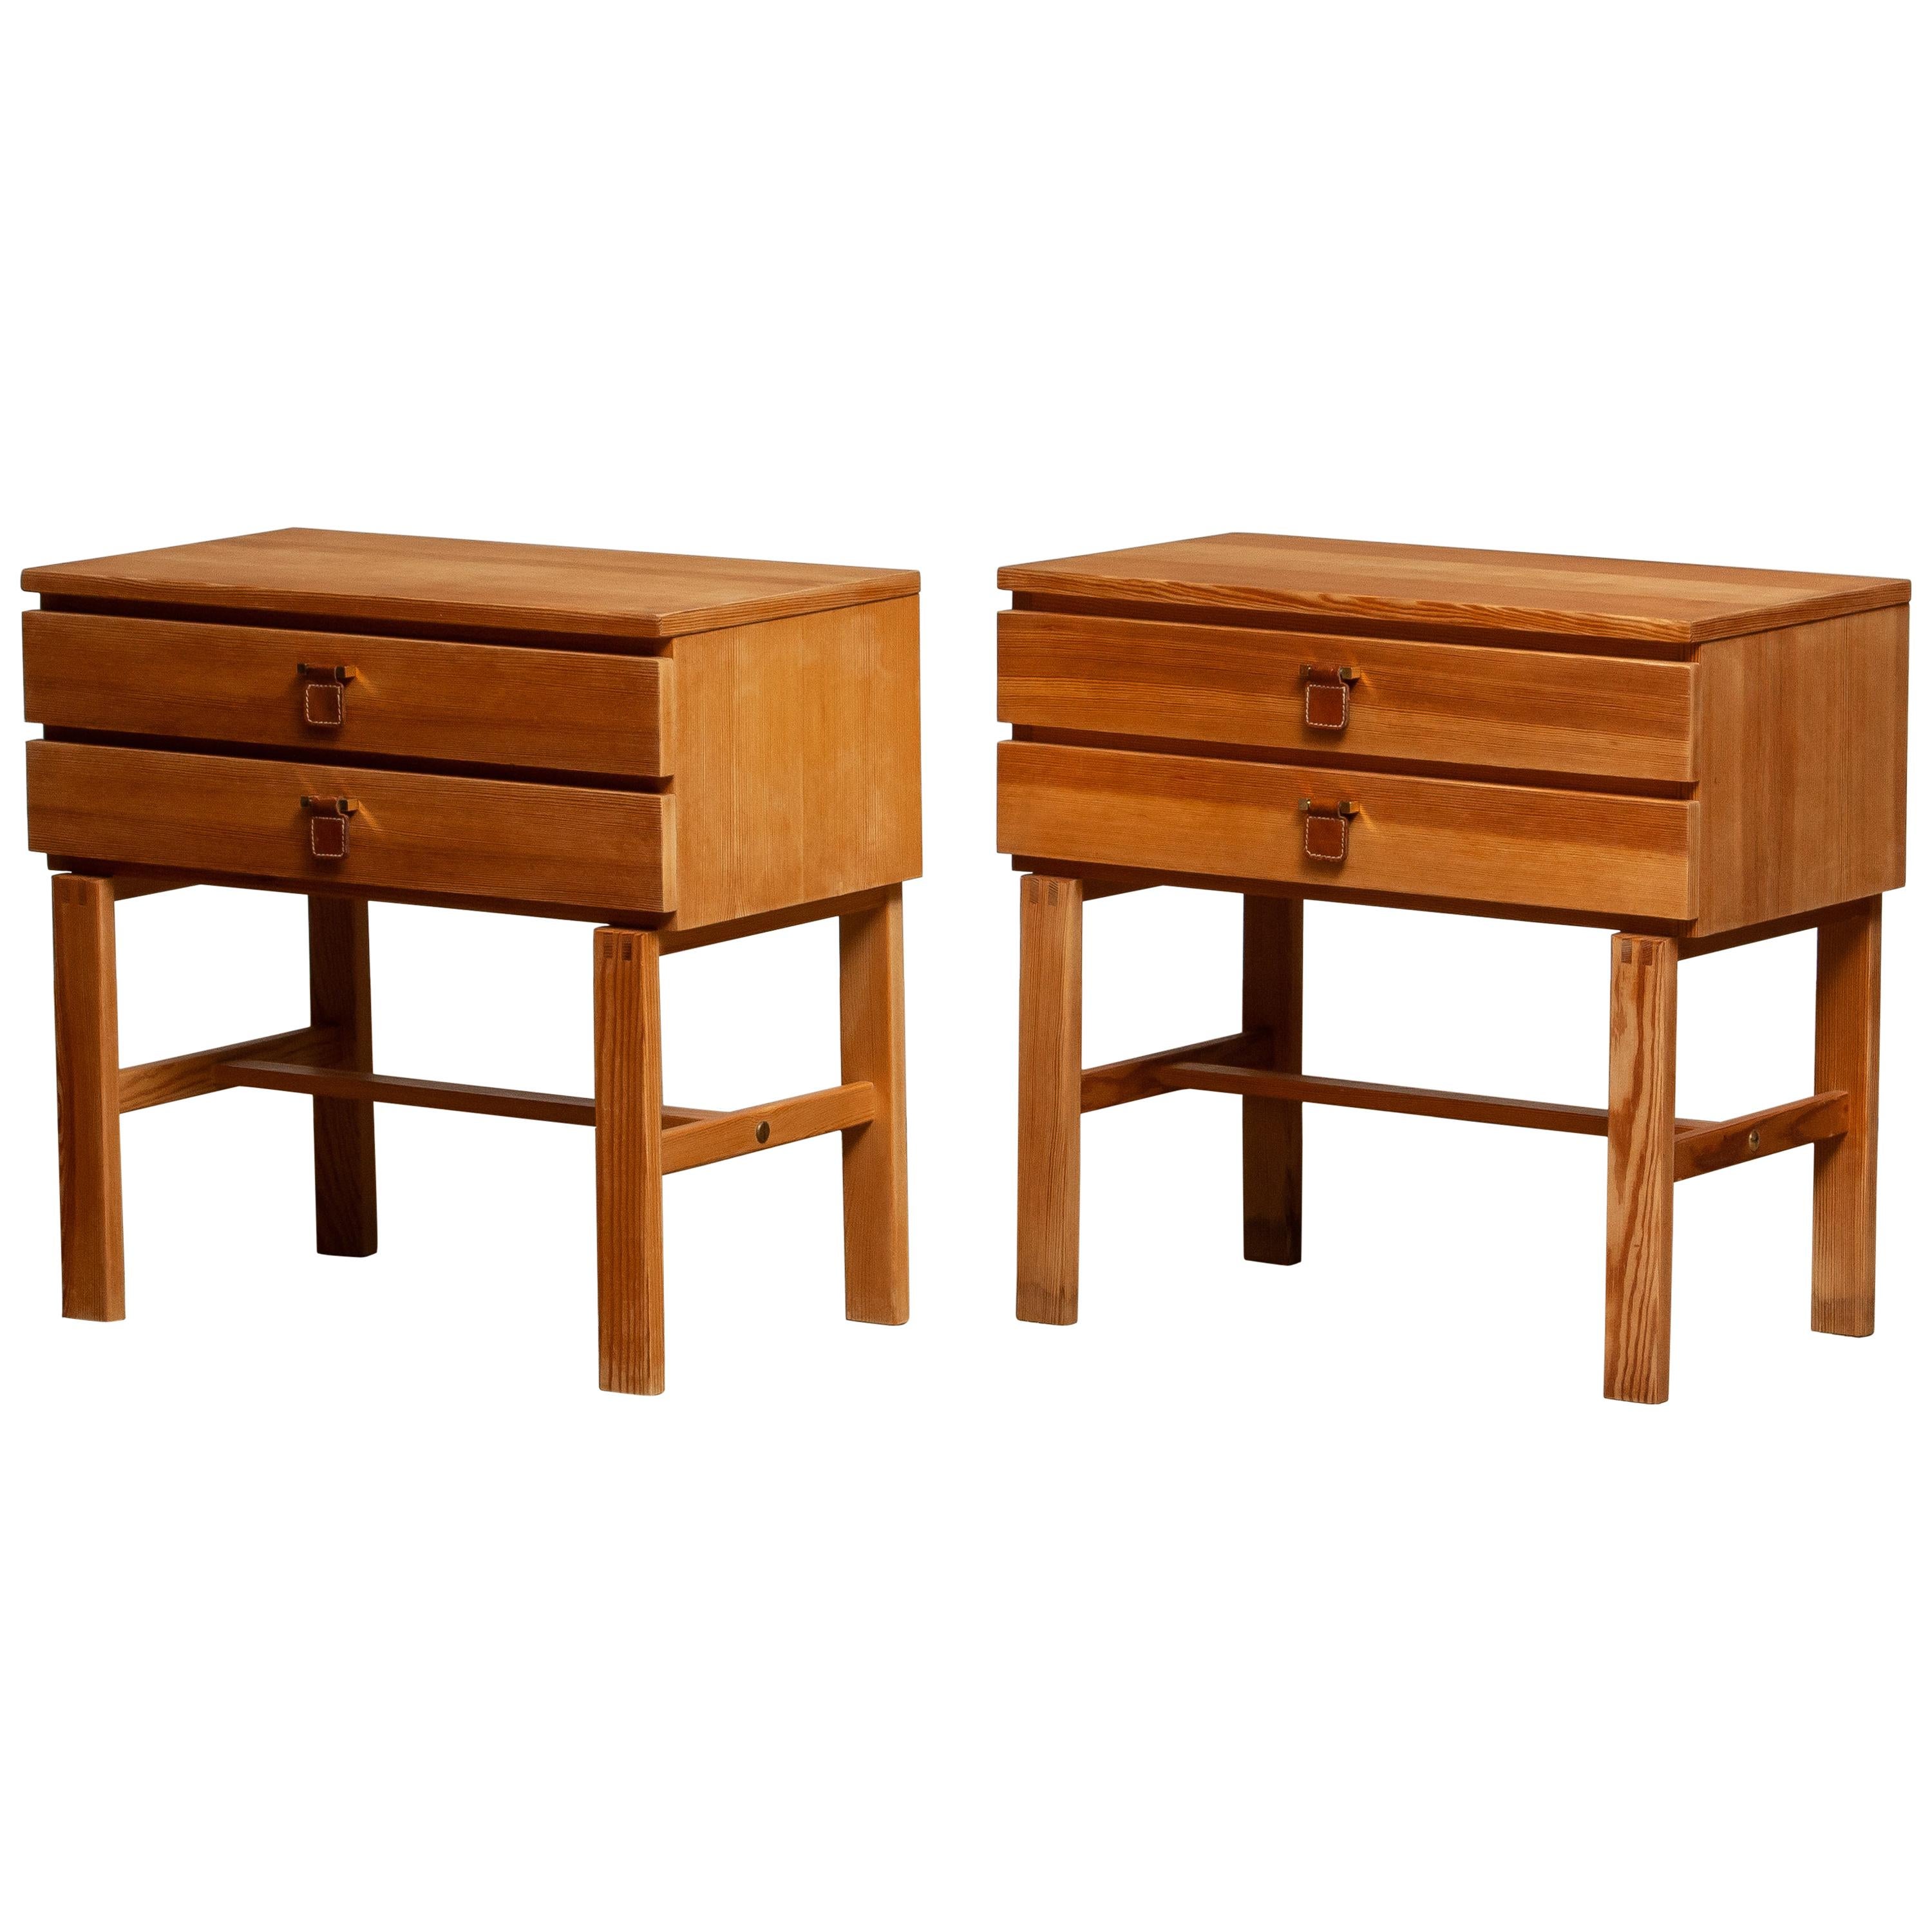 Beautiful and rare set of two bedside tables in pine and made in the 1970s by Nybrofabriken in Fröseke in Sweden. The bedside tables are designed by Sigurd Göransson.
Both the bedside tables has two drawers all with leather and brass handles.
The